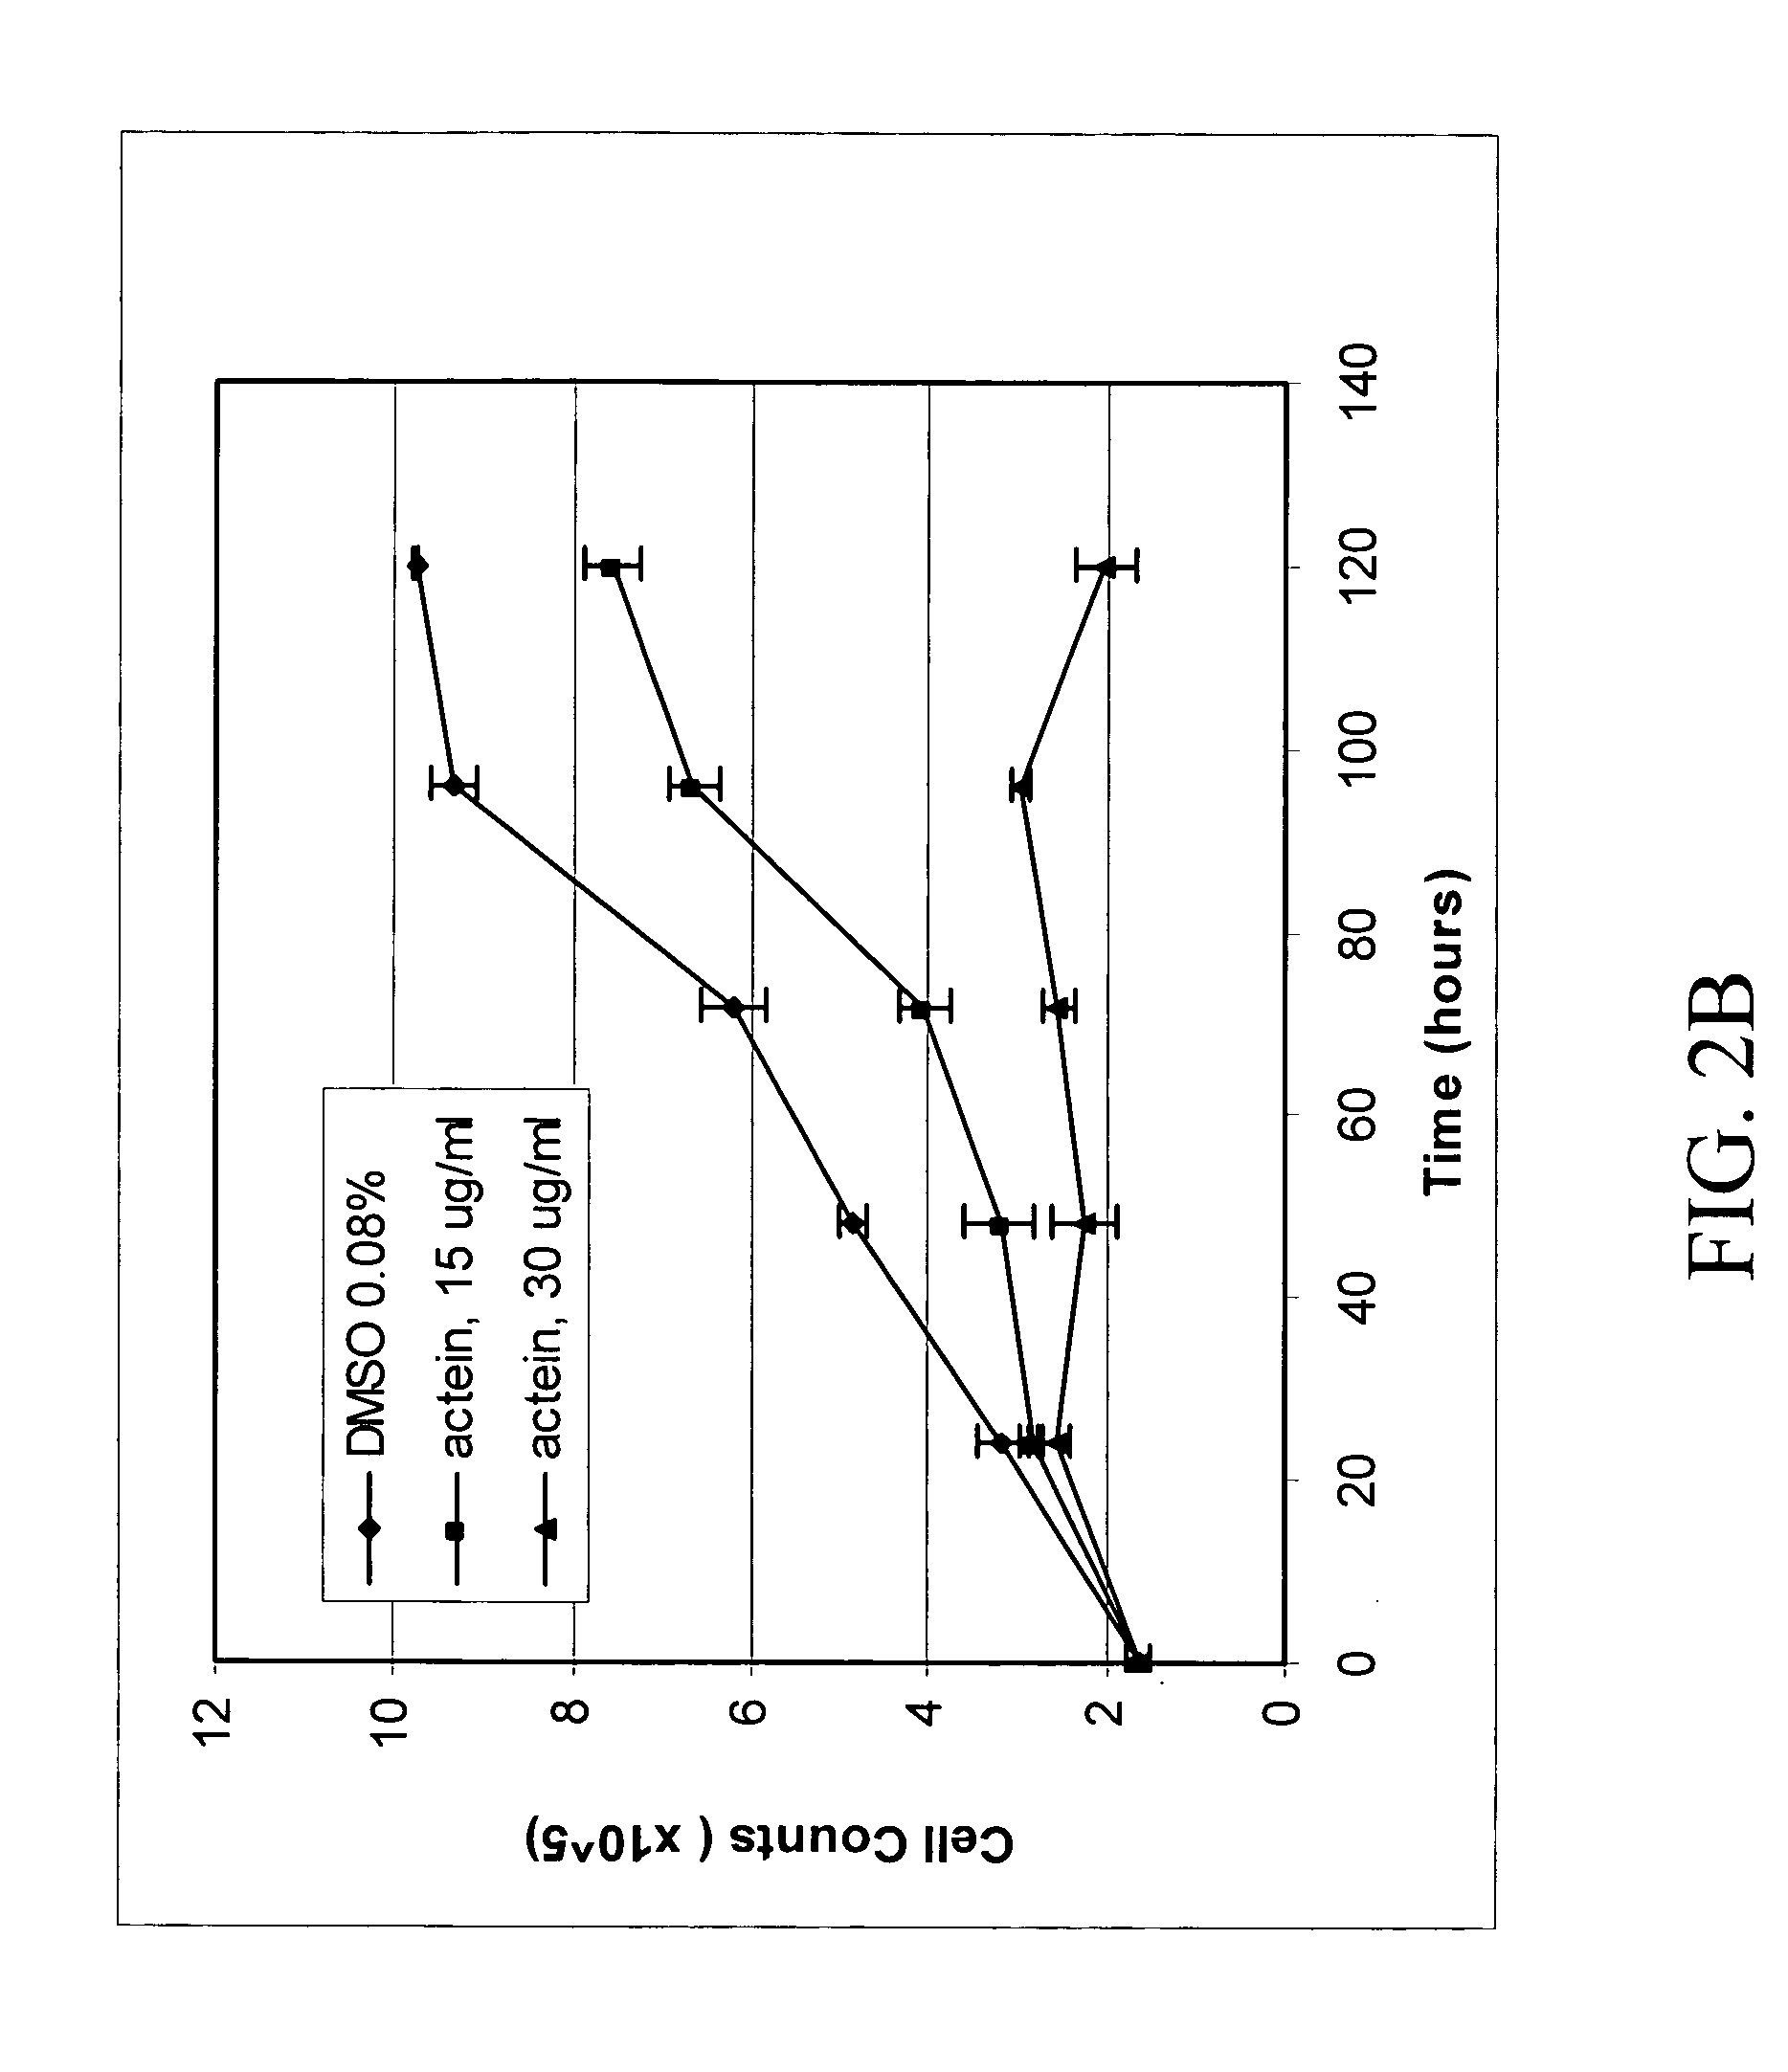 Anti-neoplastic compositions comprising extracts of black cohosh